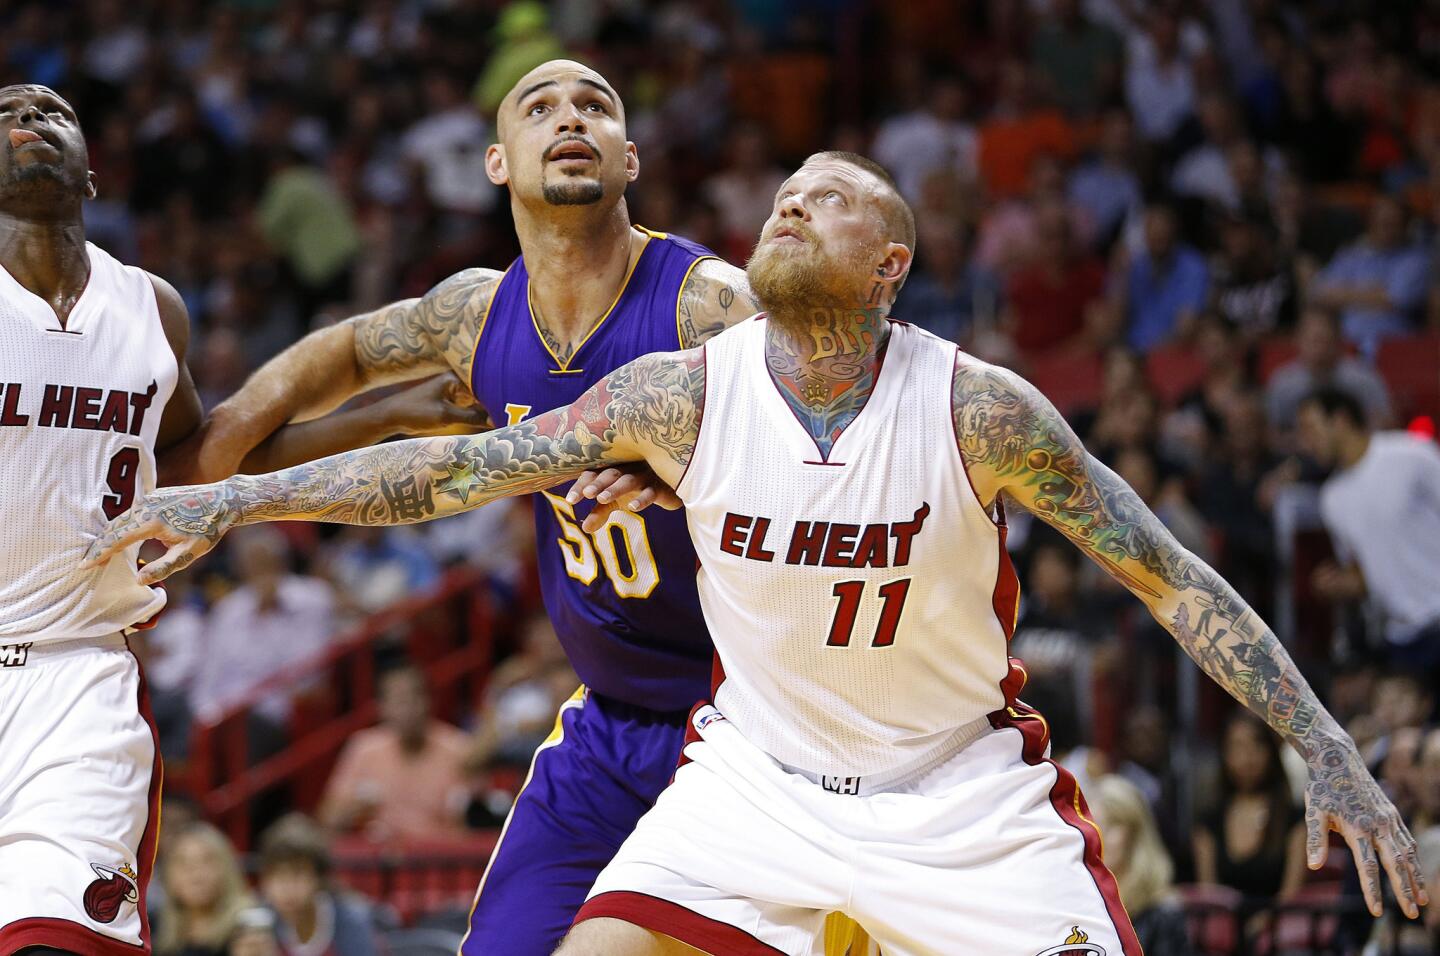 Heat center Chris Anderson boxes out Robert Sacre during the first half of a game Wednesday in Miami at AmericanAirlines Arena.